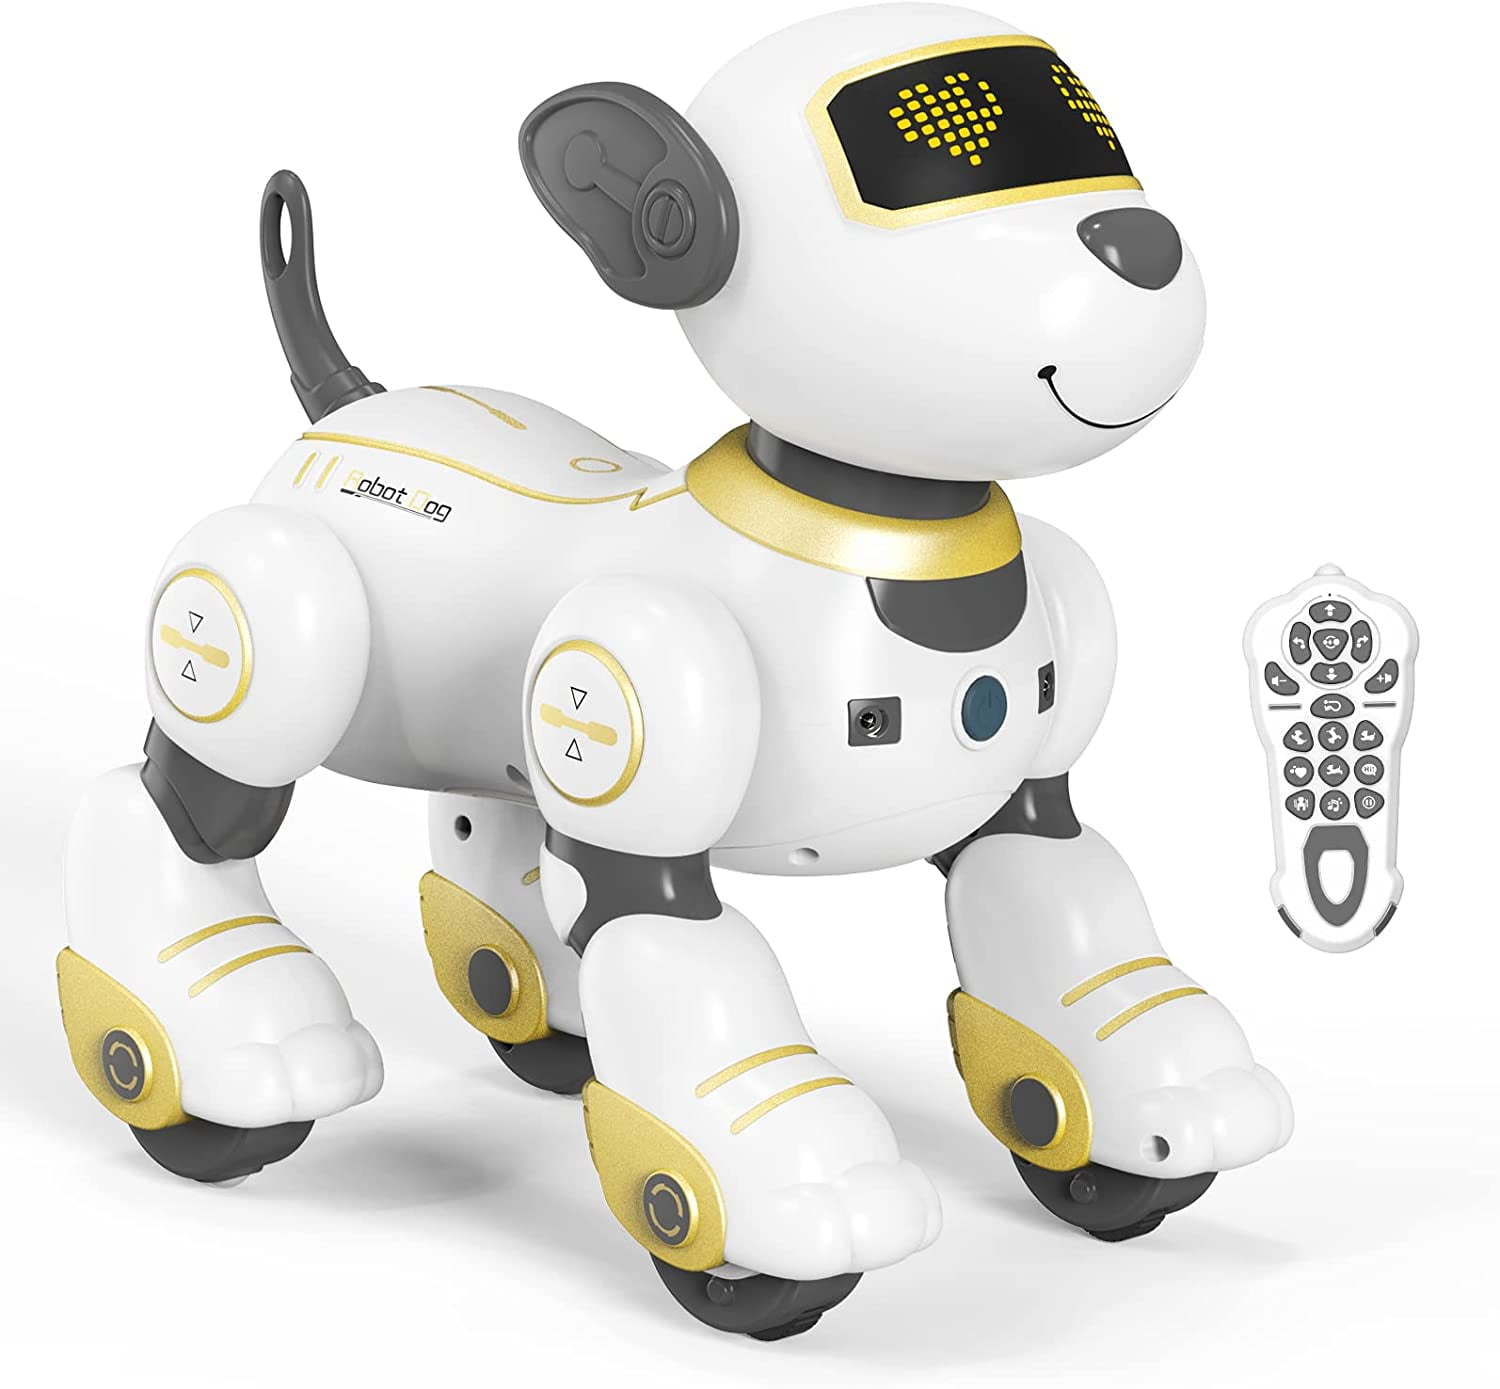 STEMTRON Remote Control Robot Dog Toy Programmable Interactive & Dancing (Gold)